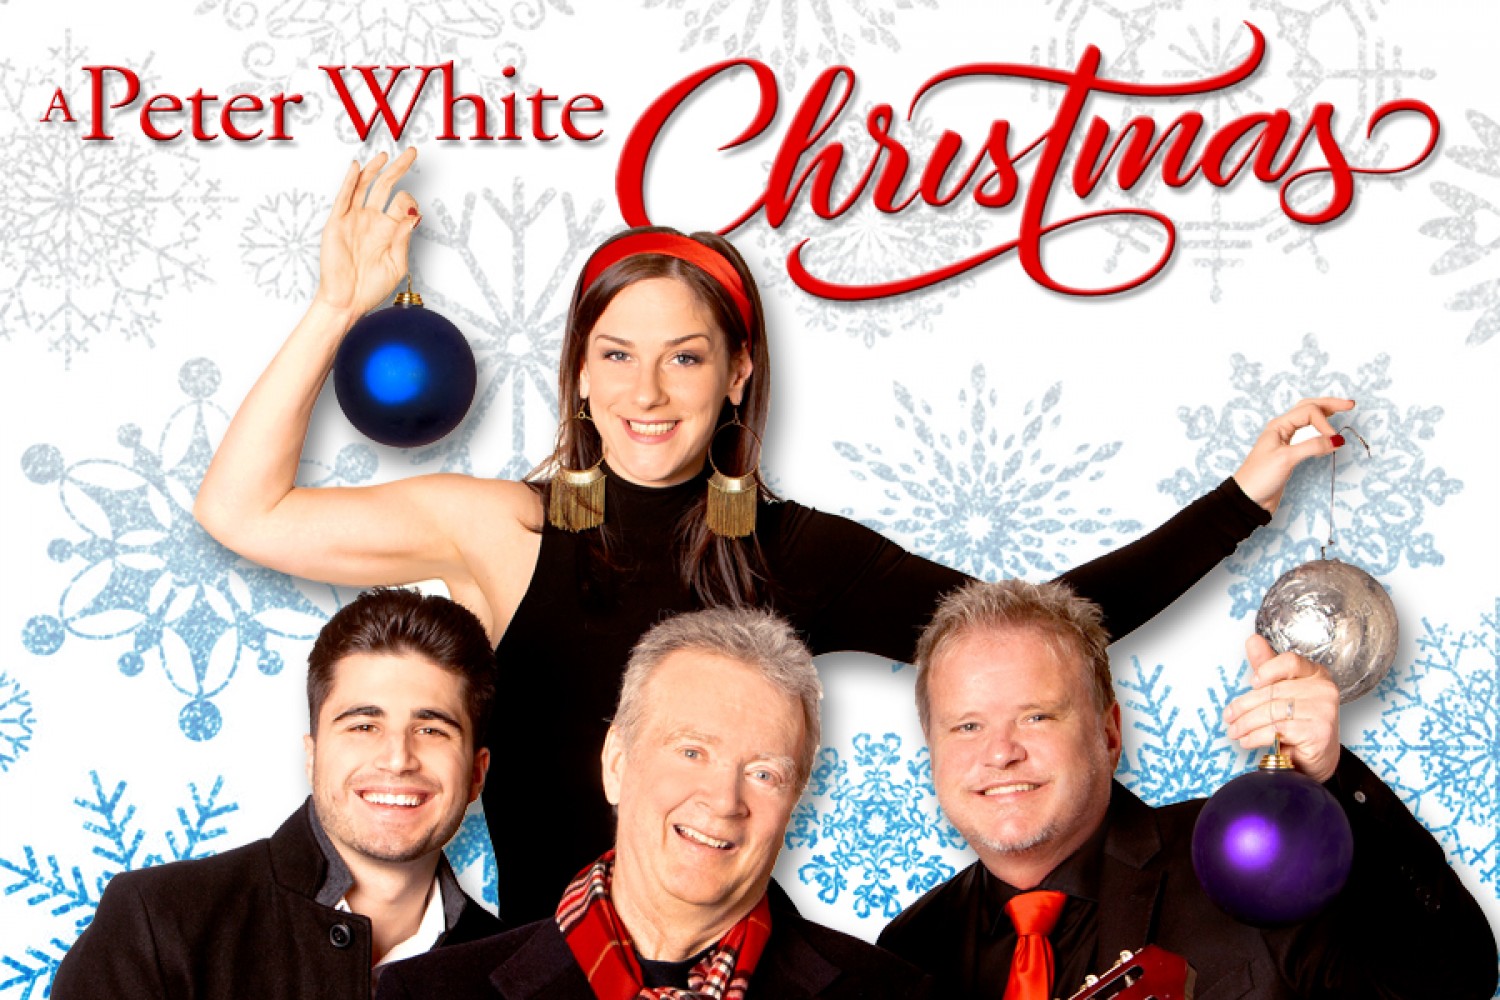 A Peter White Christmas with Euge Groove, Vincent Ingala and Lindsey